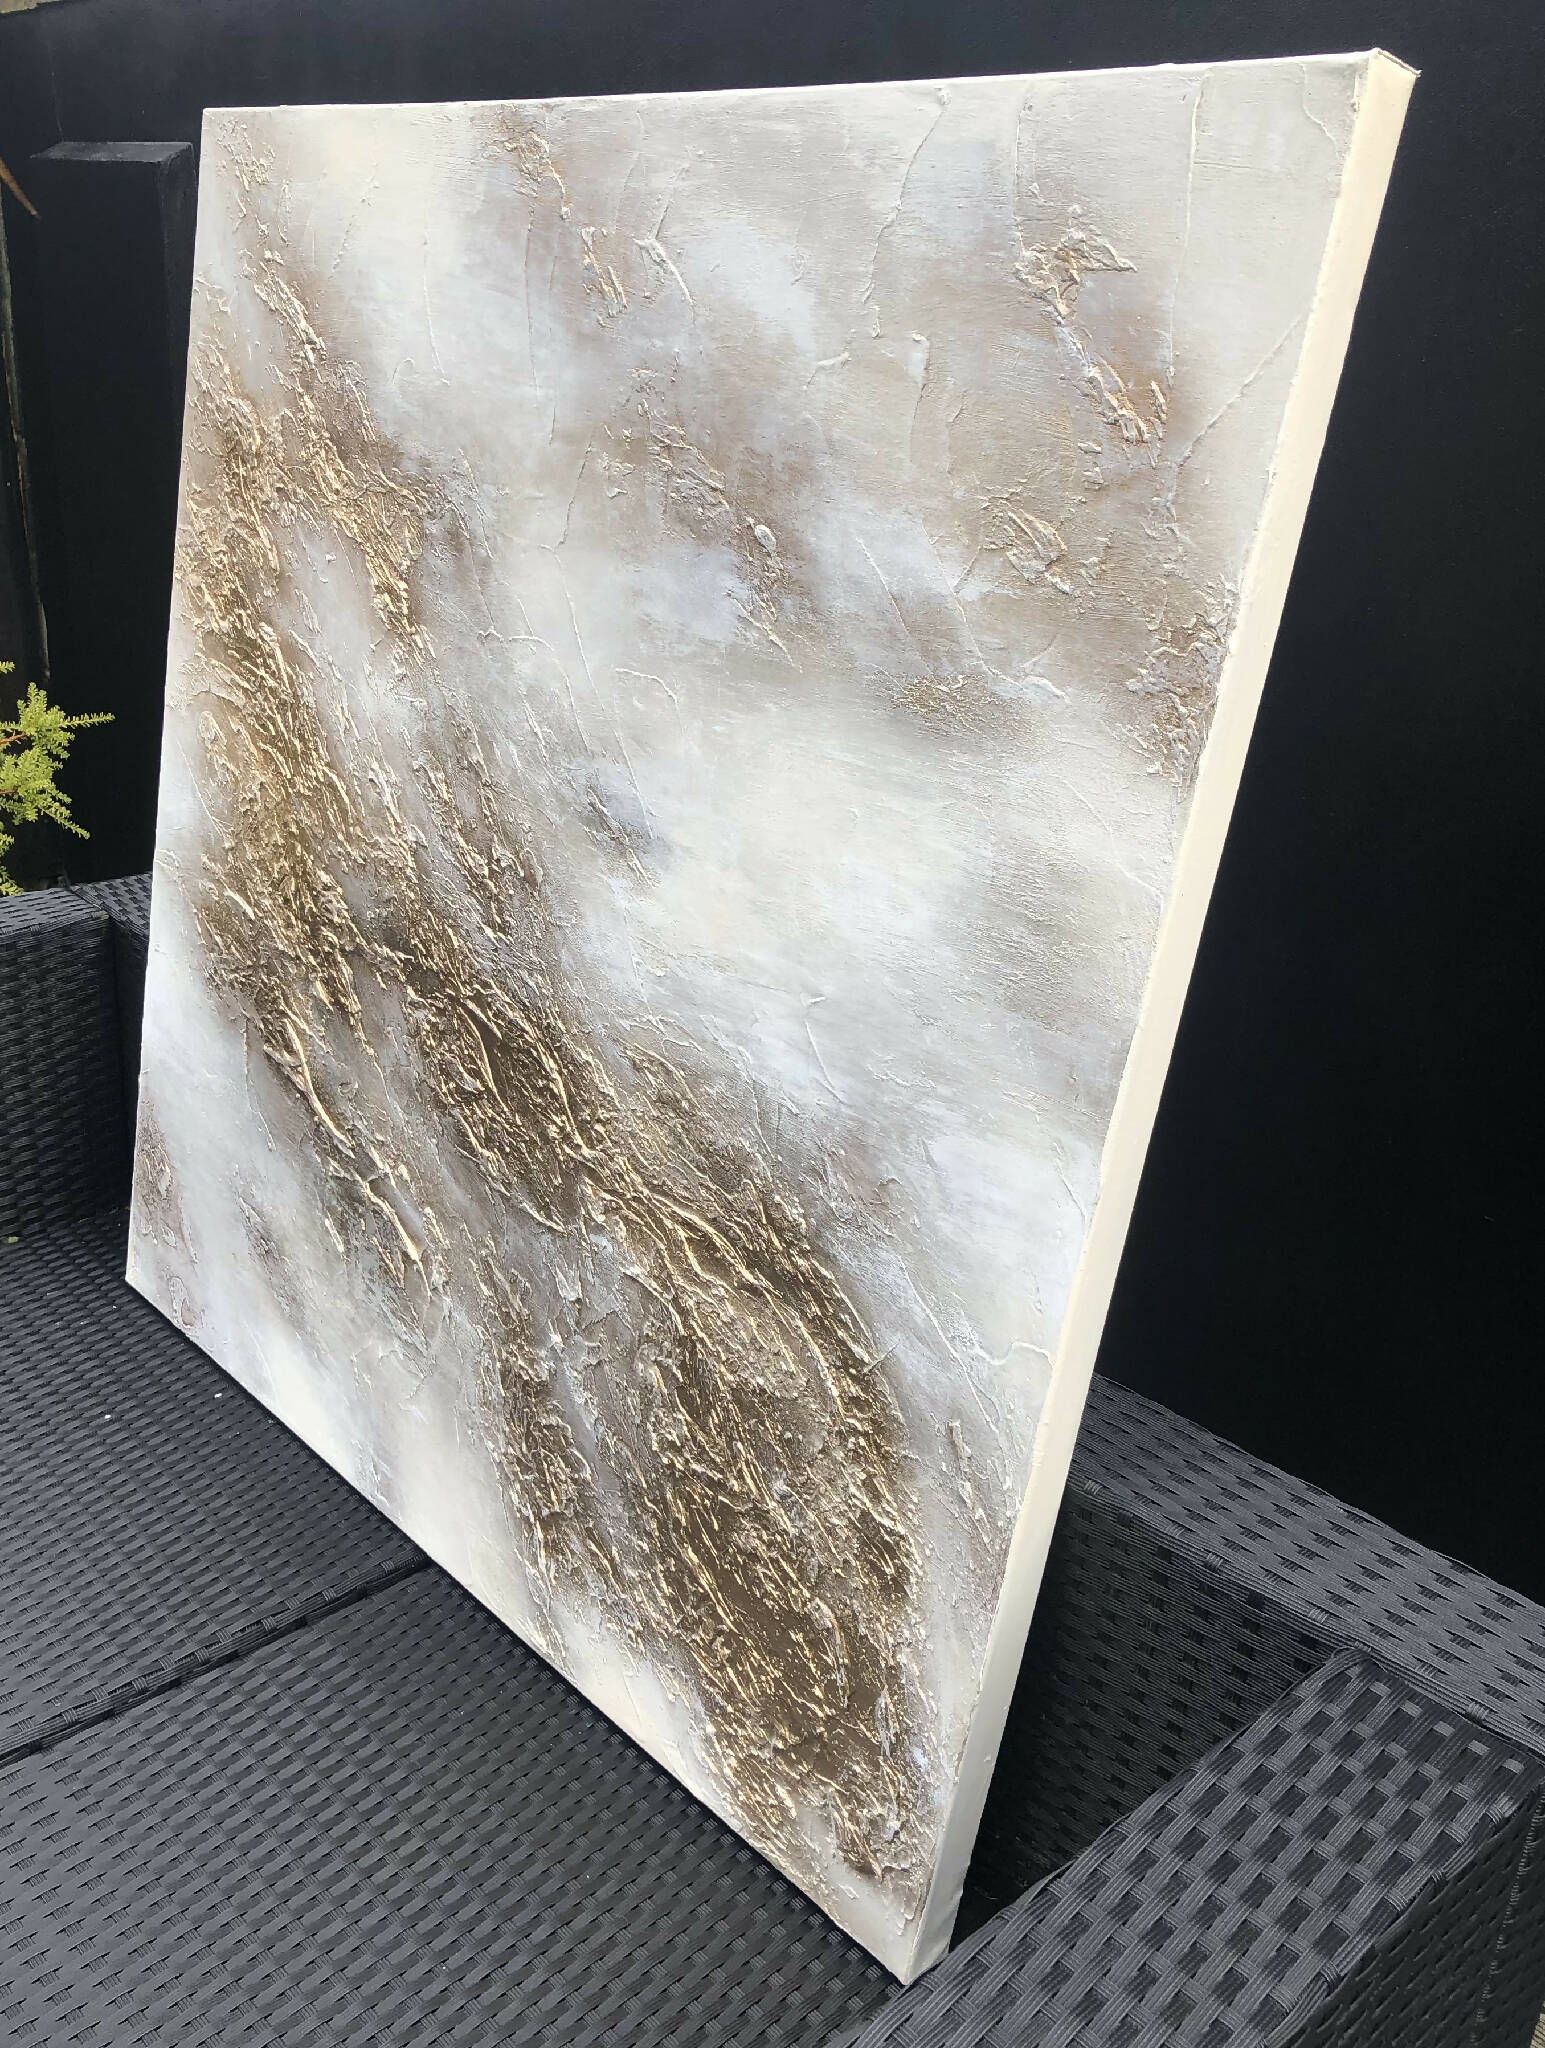 EMPYREAL - Textured acrylic art canvas in creamy white and metallic gold